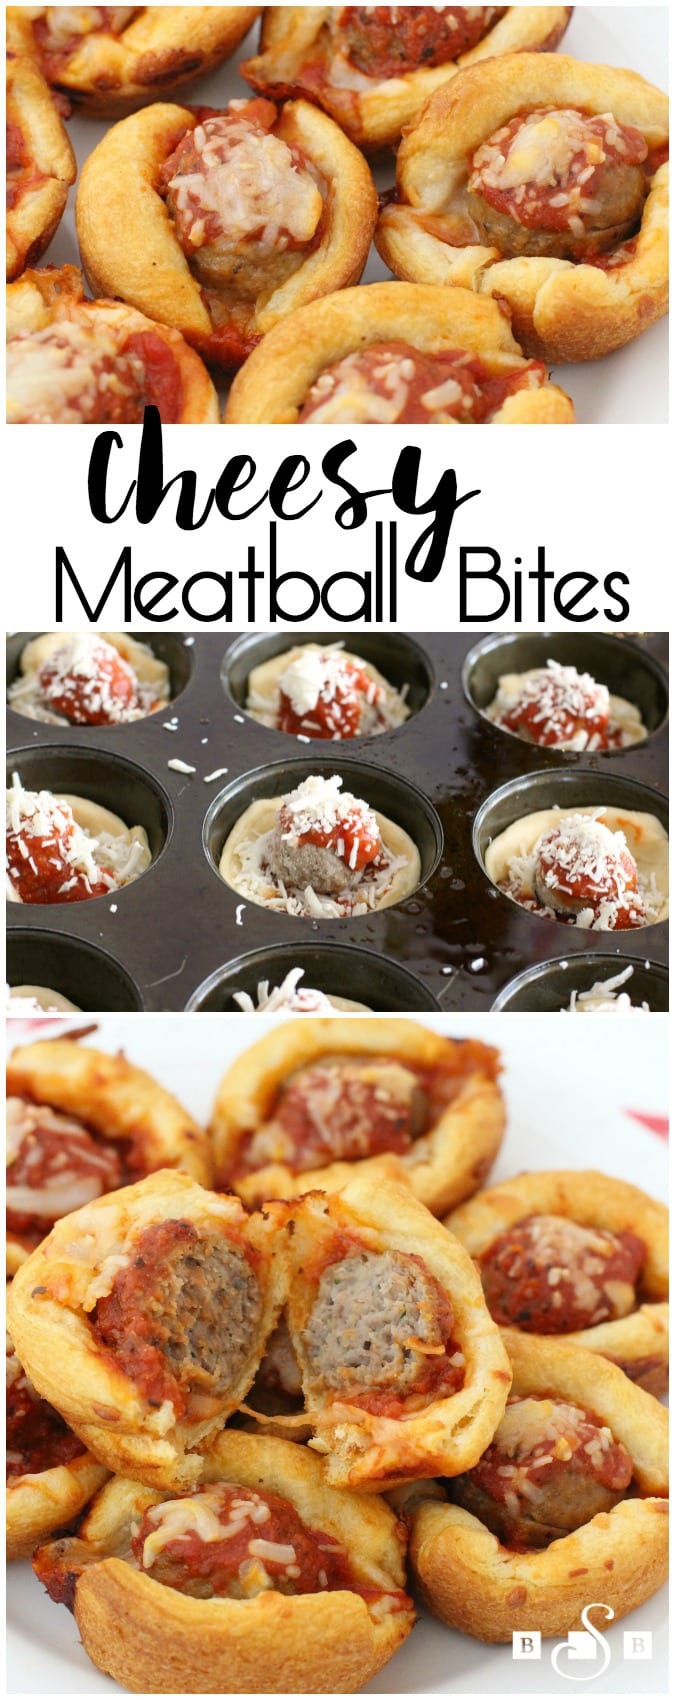 Cheesy Meatball Bites made with crescent dough, meatballs, marinara sauce and lots of cheese! Easy #appetizer #recipe perfect for parties & game day.